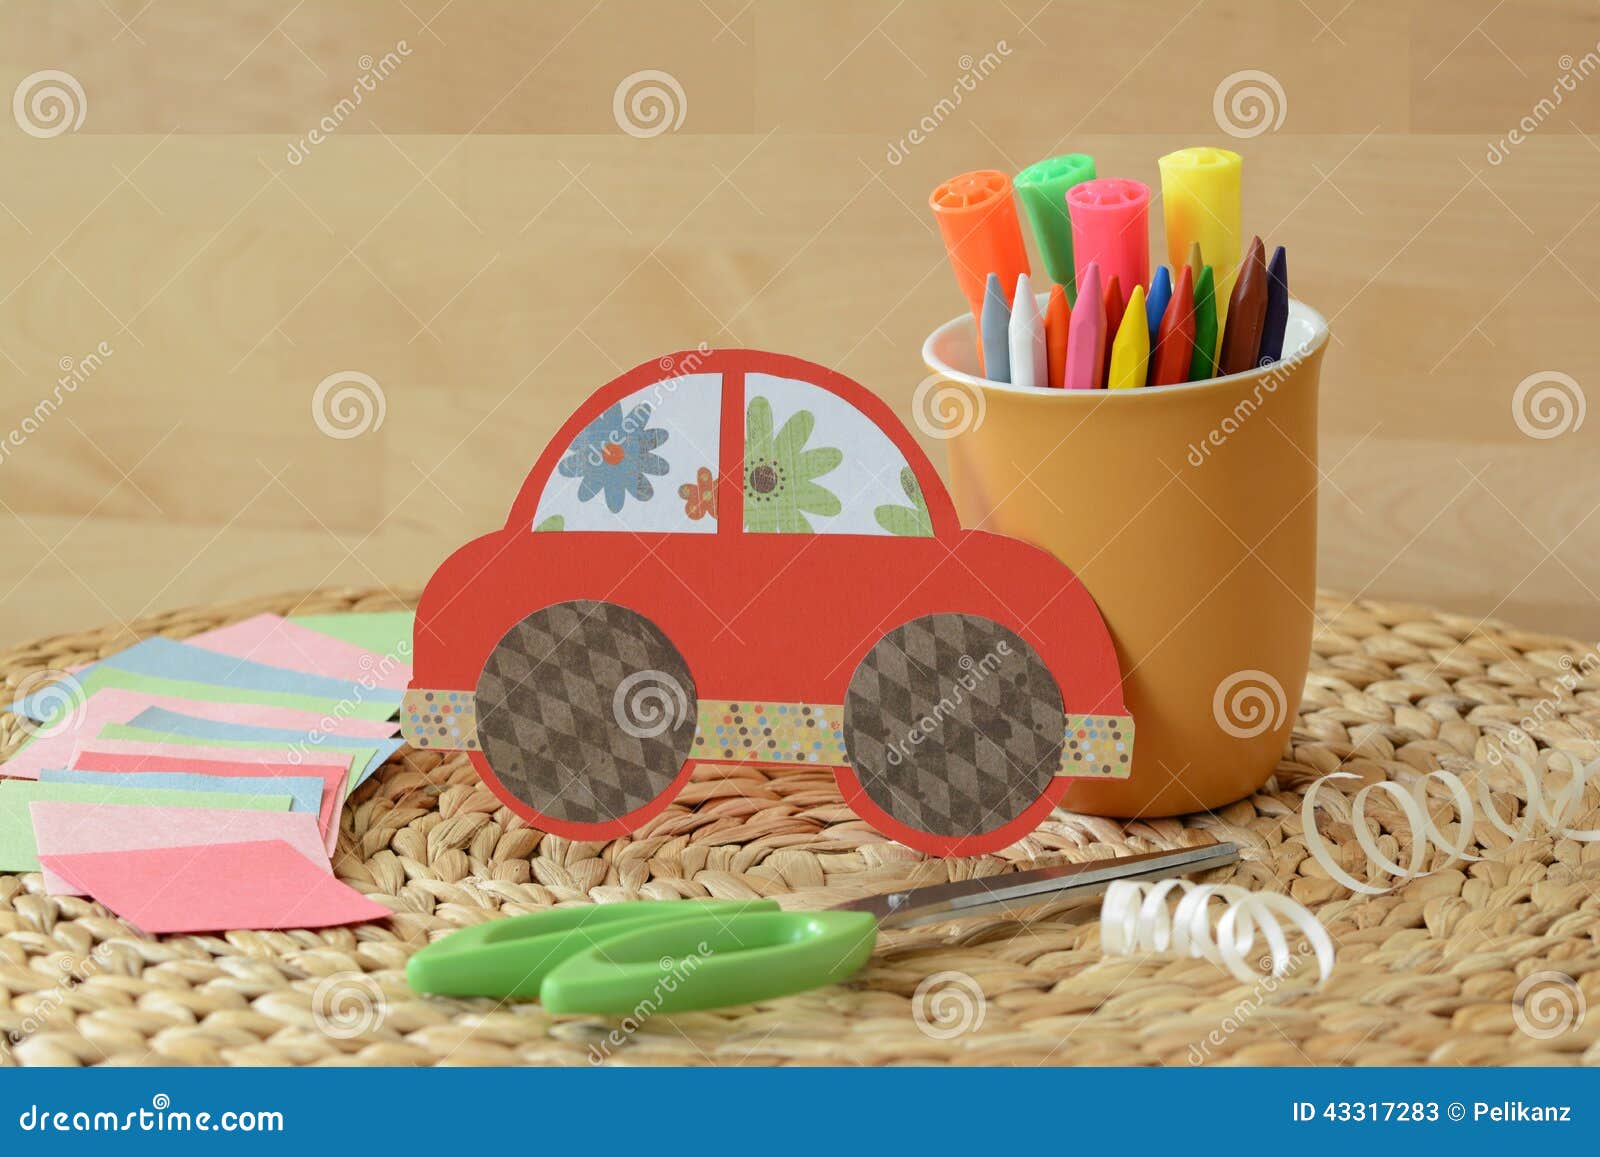 cute crafty hand made red car for kids with colorful pastels and scissors